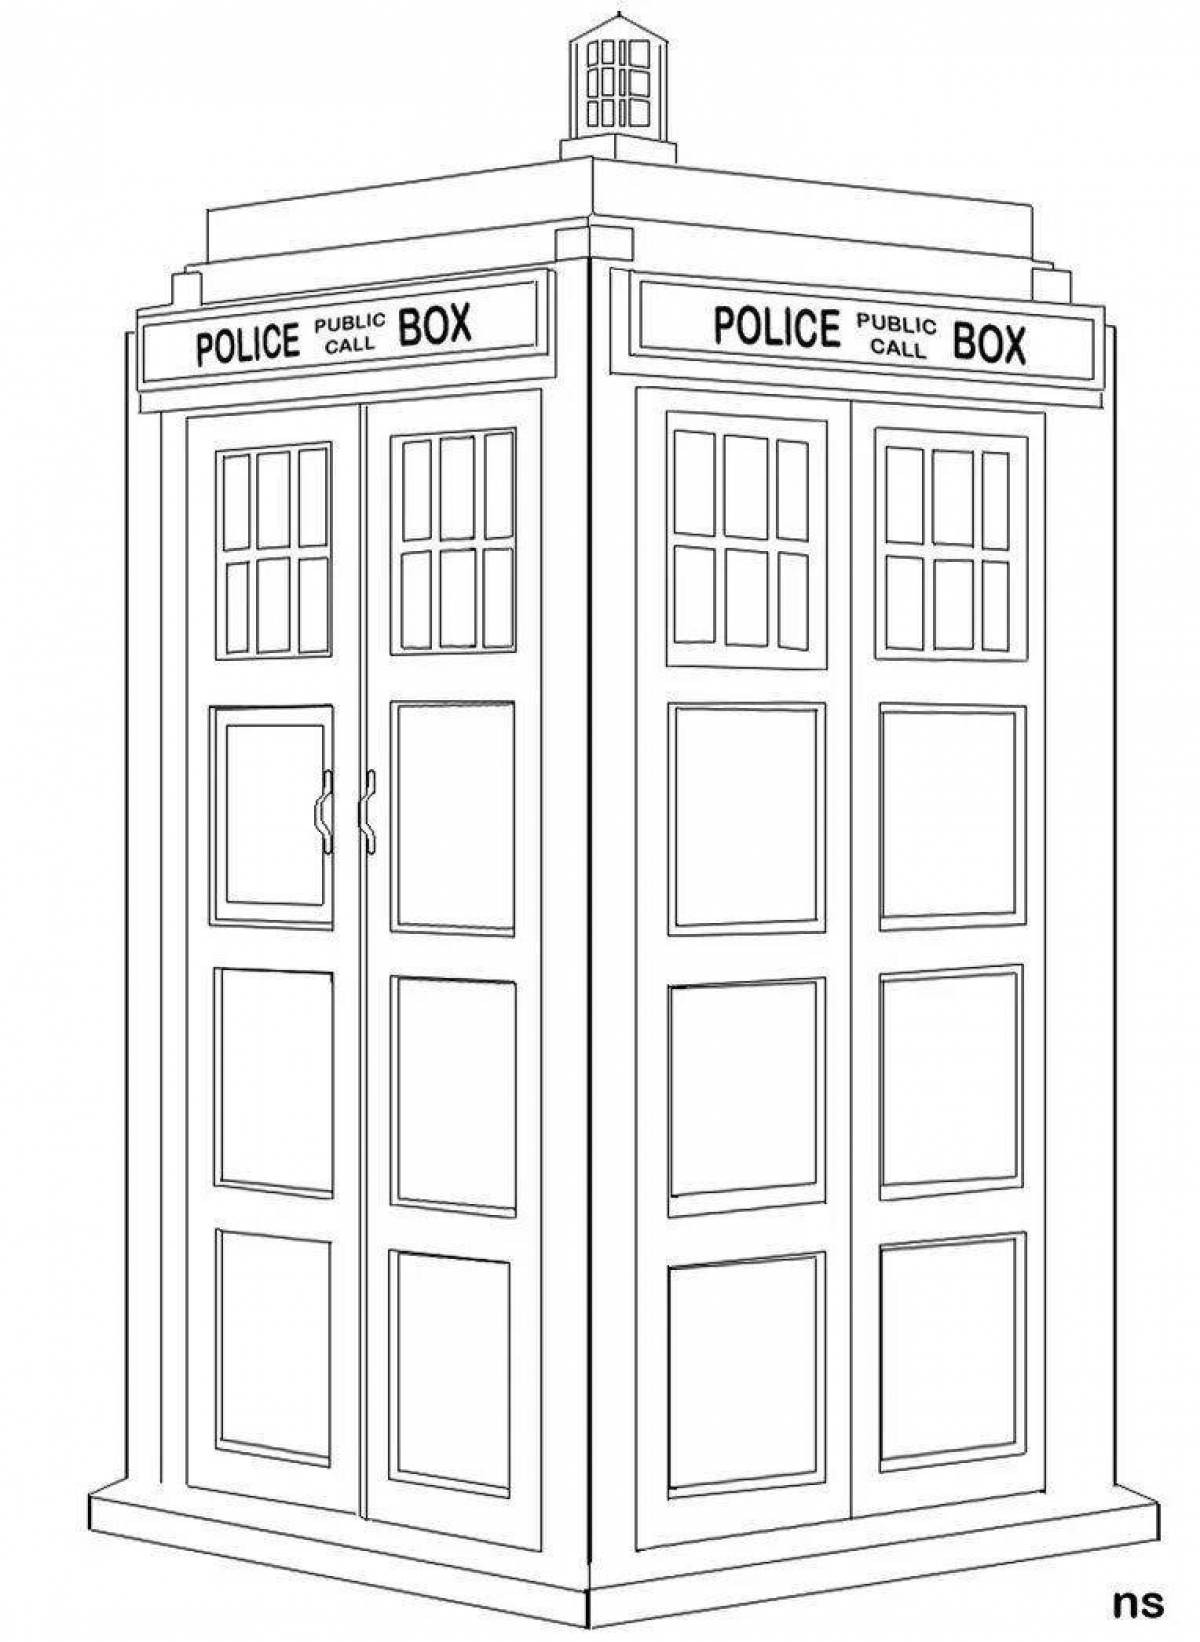 Jolly doctor who coloring book